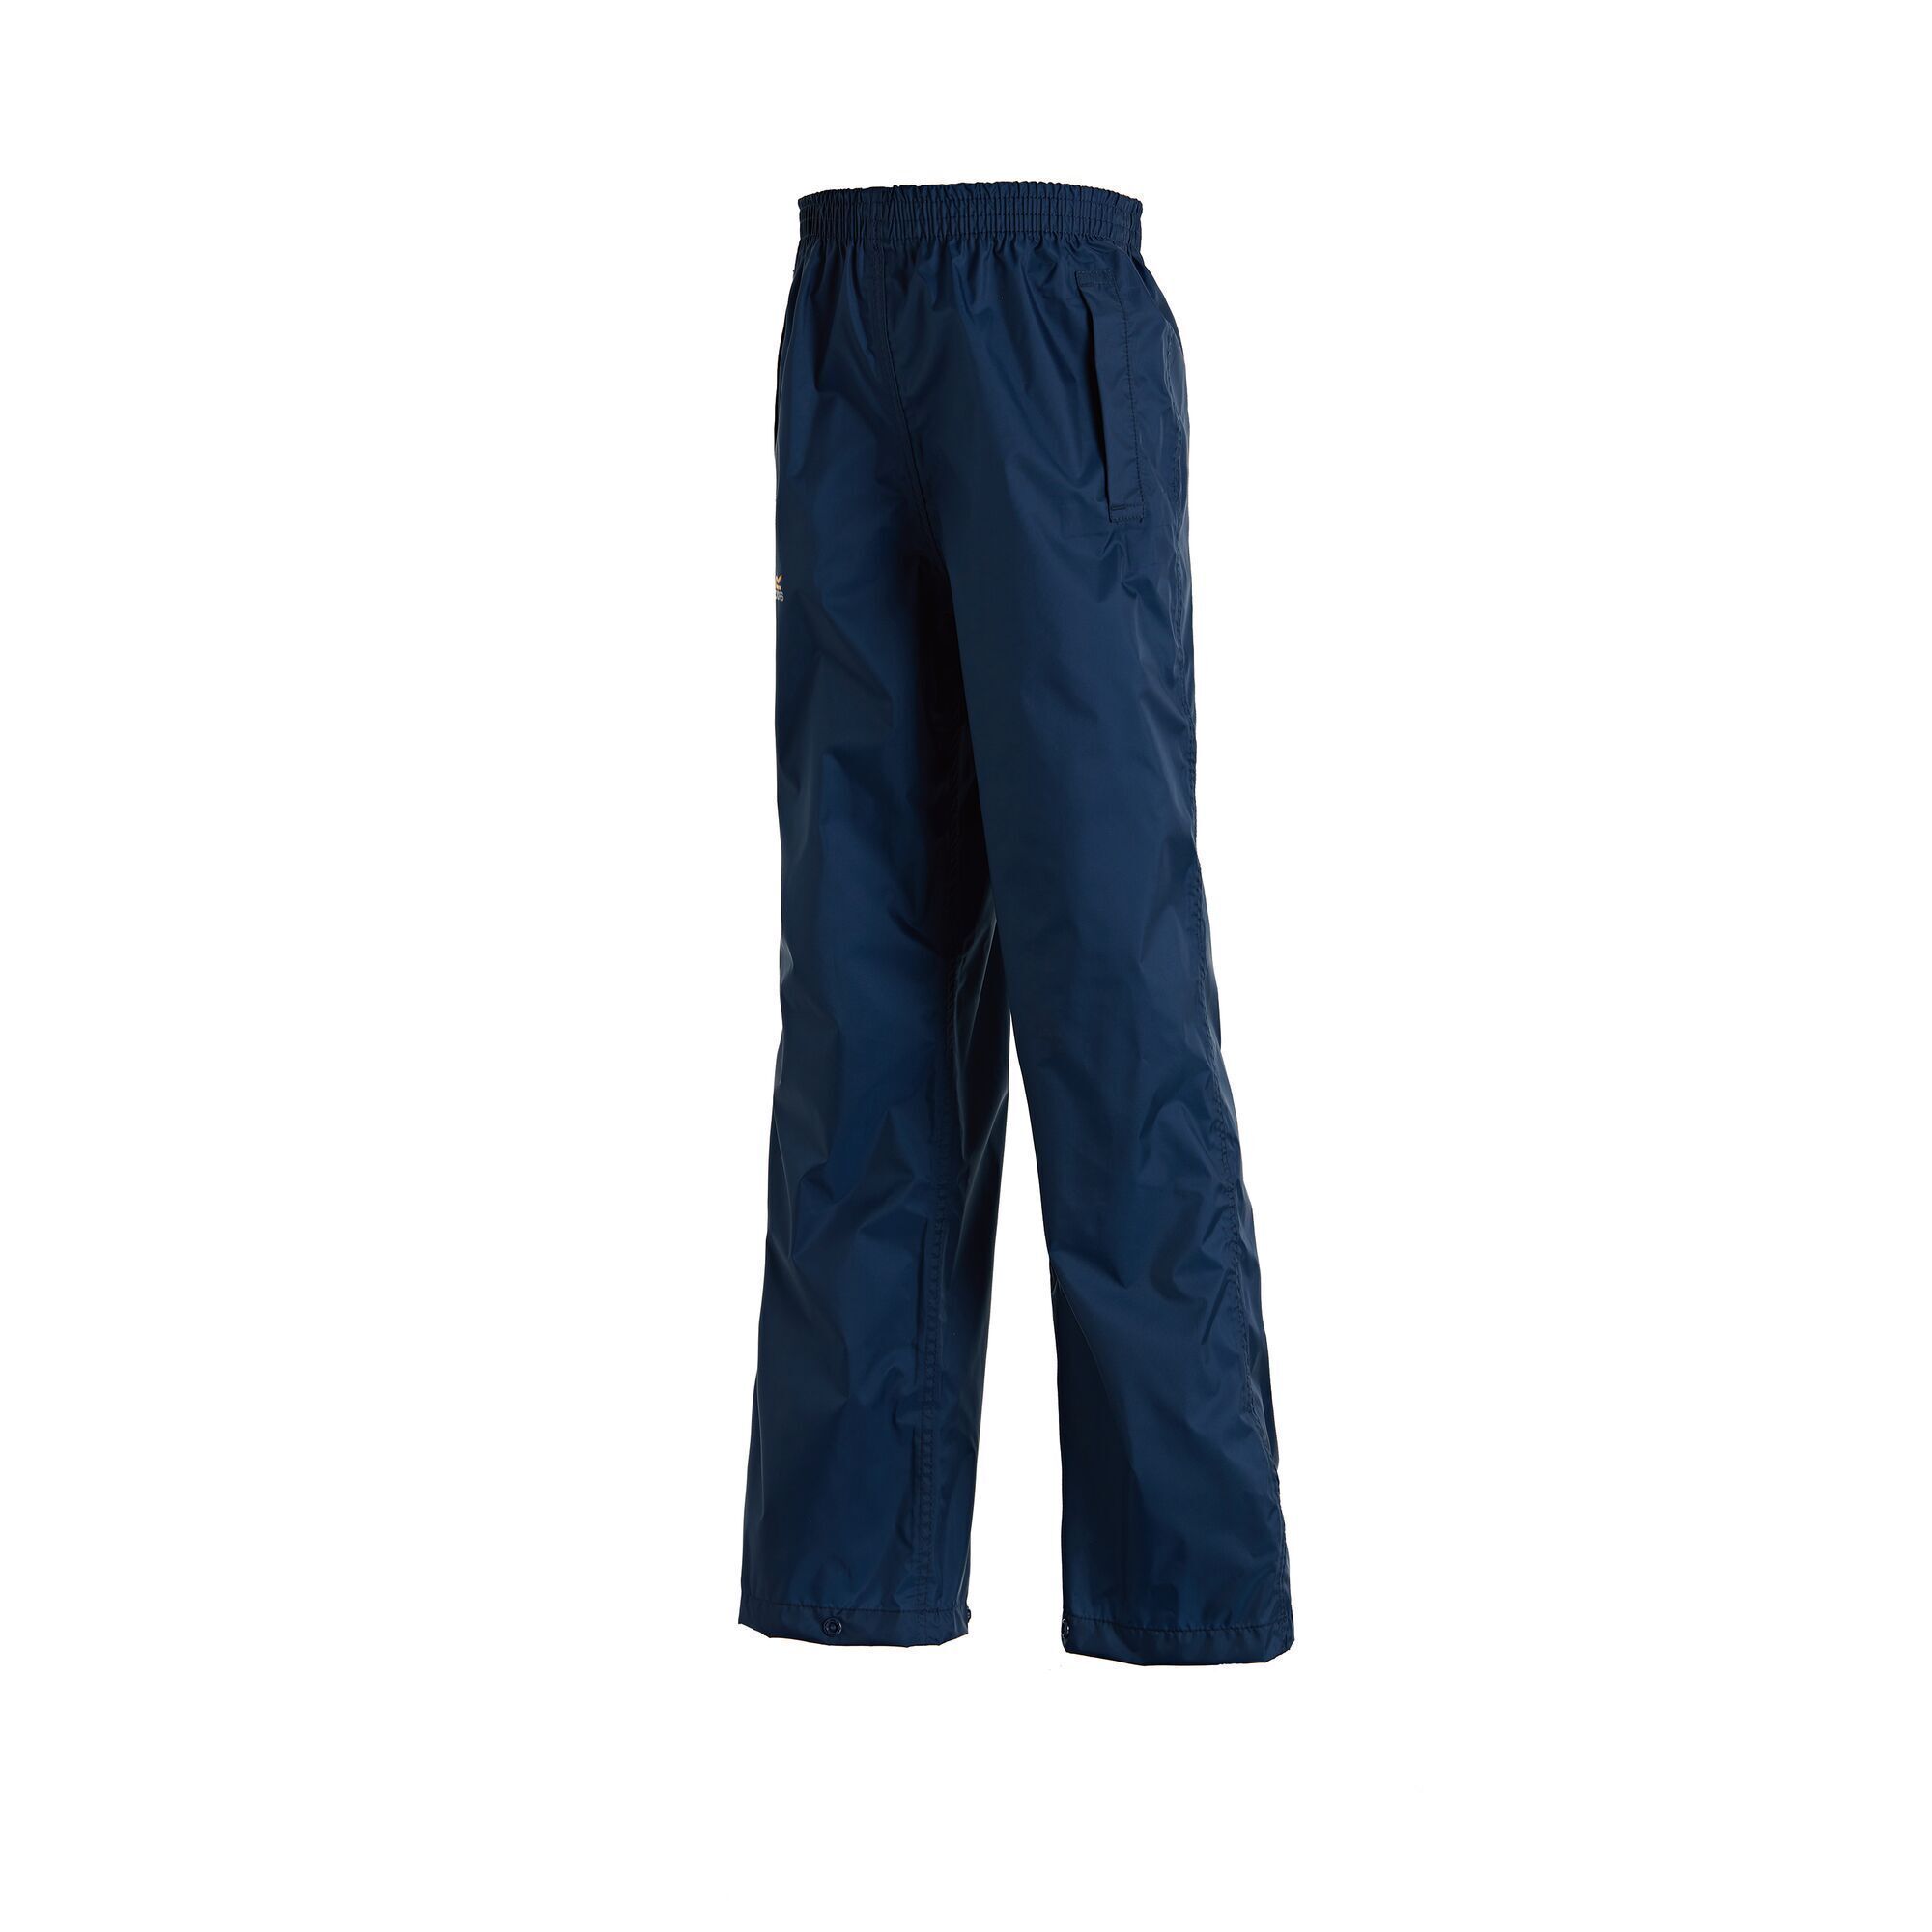 The Pack-it is our boys Outdoor Adventure unlined packable overtrouser designed for wet weather fun. The rainy weather fighters are made from our Isolite fabric with lightweight, waterproof, breathable and wind resistant powers. The handy stuff sack is perfect for stowing away in school bags. Pair with the matching Pack-it Jacket for full protection. 100% Polyester. Regatta Kids Sizing (waist approx): 2 Years (52-53cm), 3-4 Years (53-54cm), 5-6 Years (55-57cm), 7-8 Years (58-60cm), 9-10 Years (61-64cm), 11-12 Years (65-67cm), 26